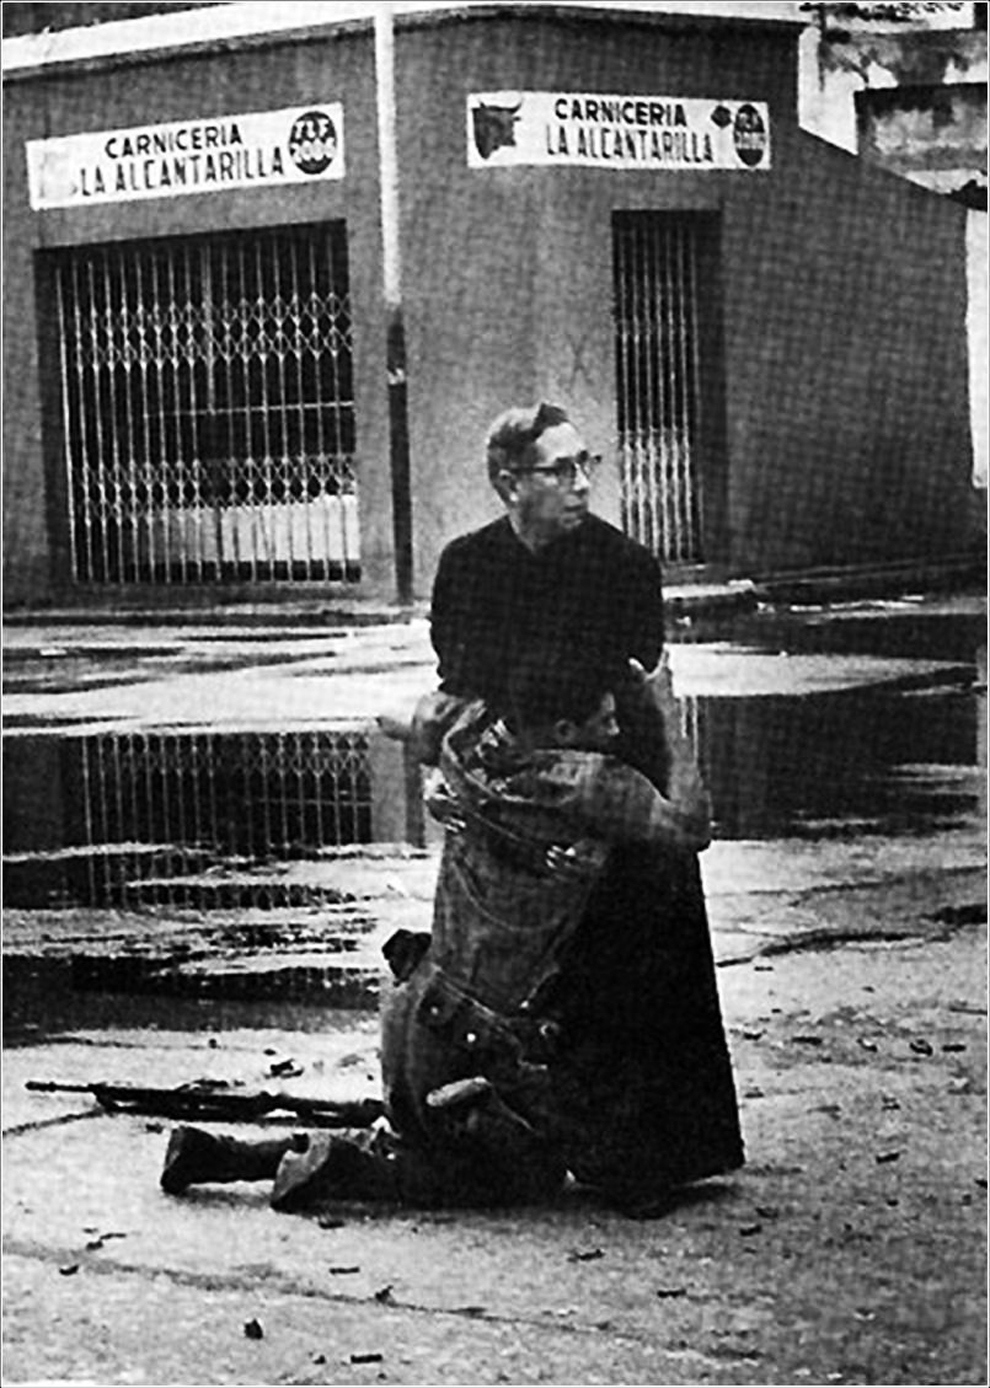 Navy chaplain Luis Padillo gives last rites to a soldier wounded by sniper fire during a revolt in Venezuela